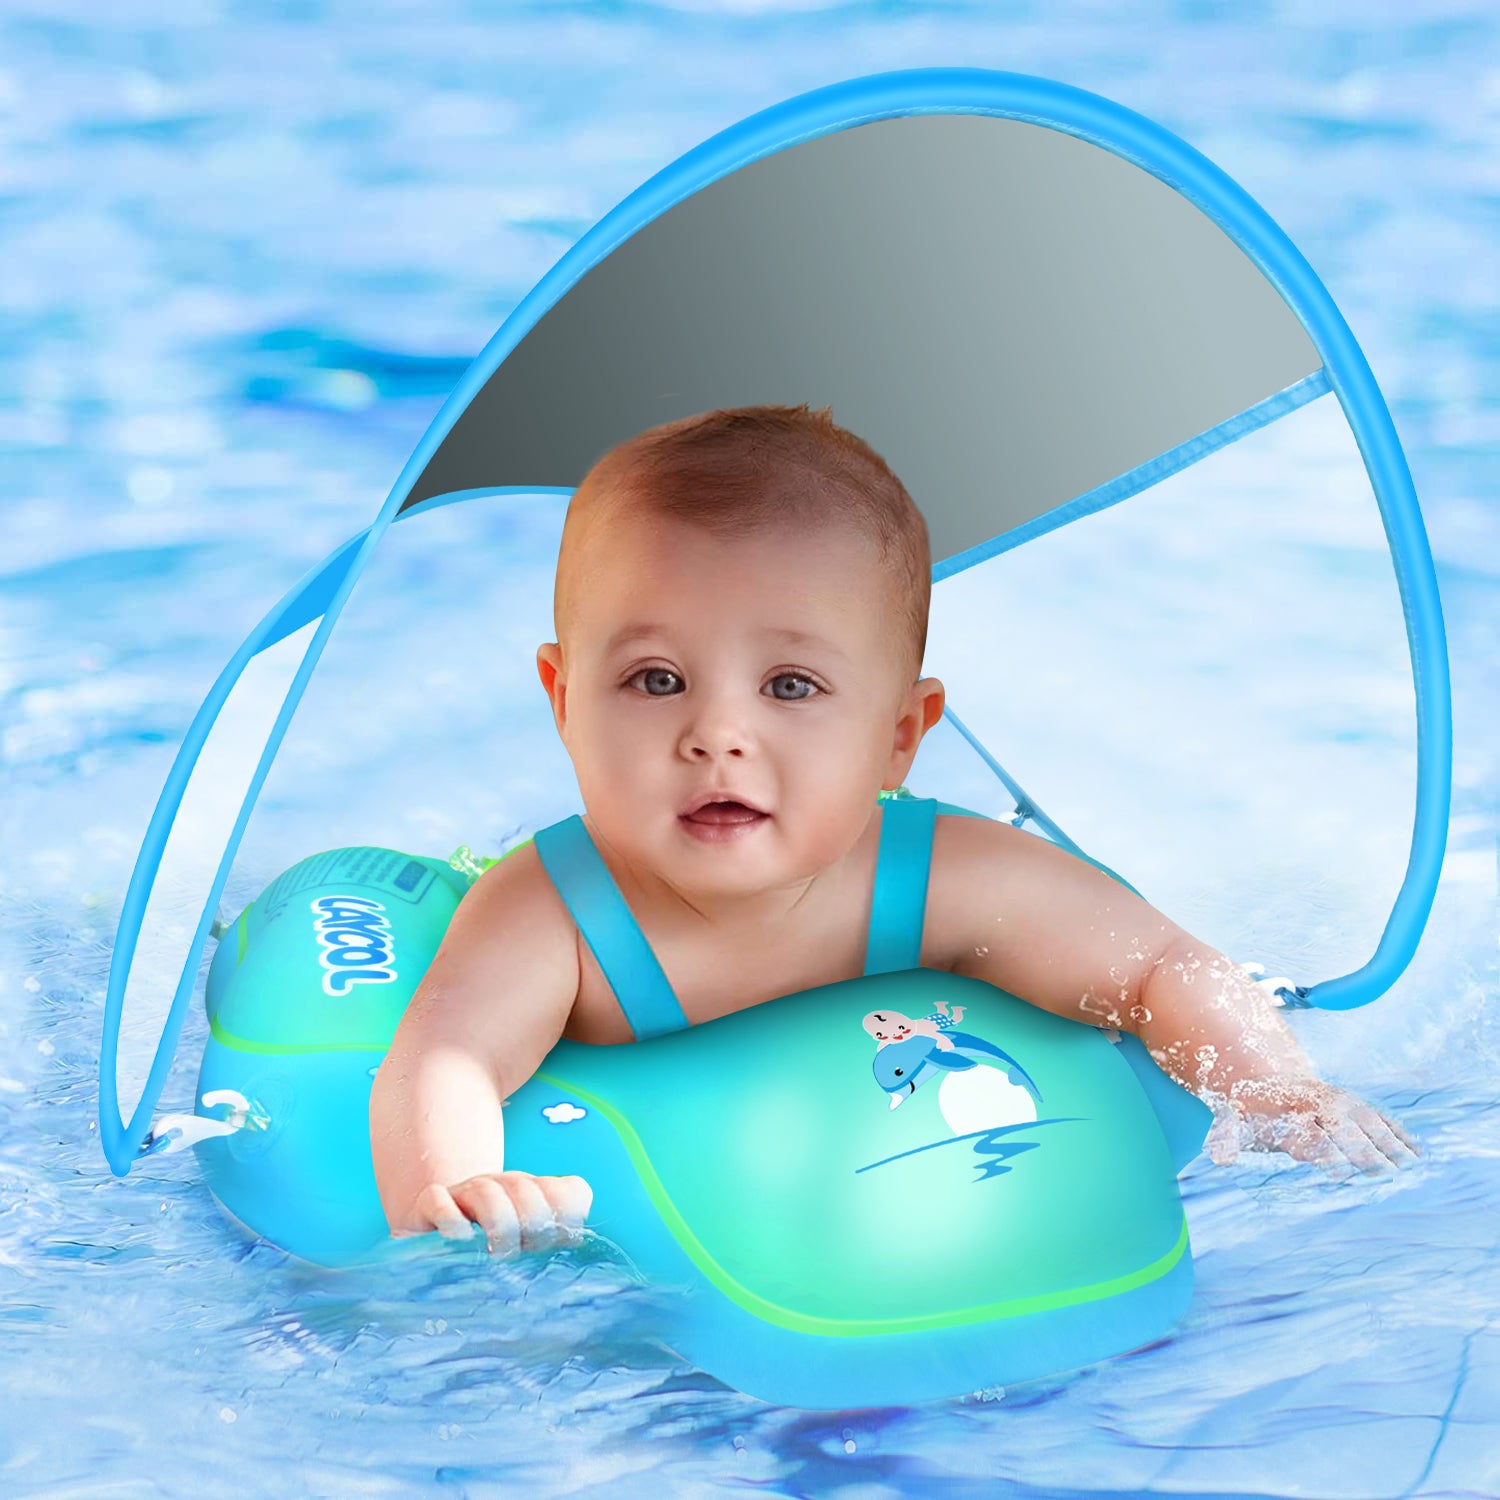 LAYCOL Baby Pool Float Ring Newest with Sun Protection Canopy,add Tail no flip Over for Age of 3-36 Months